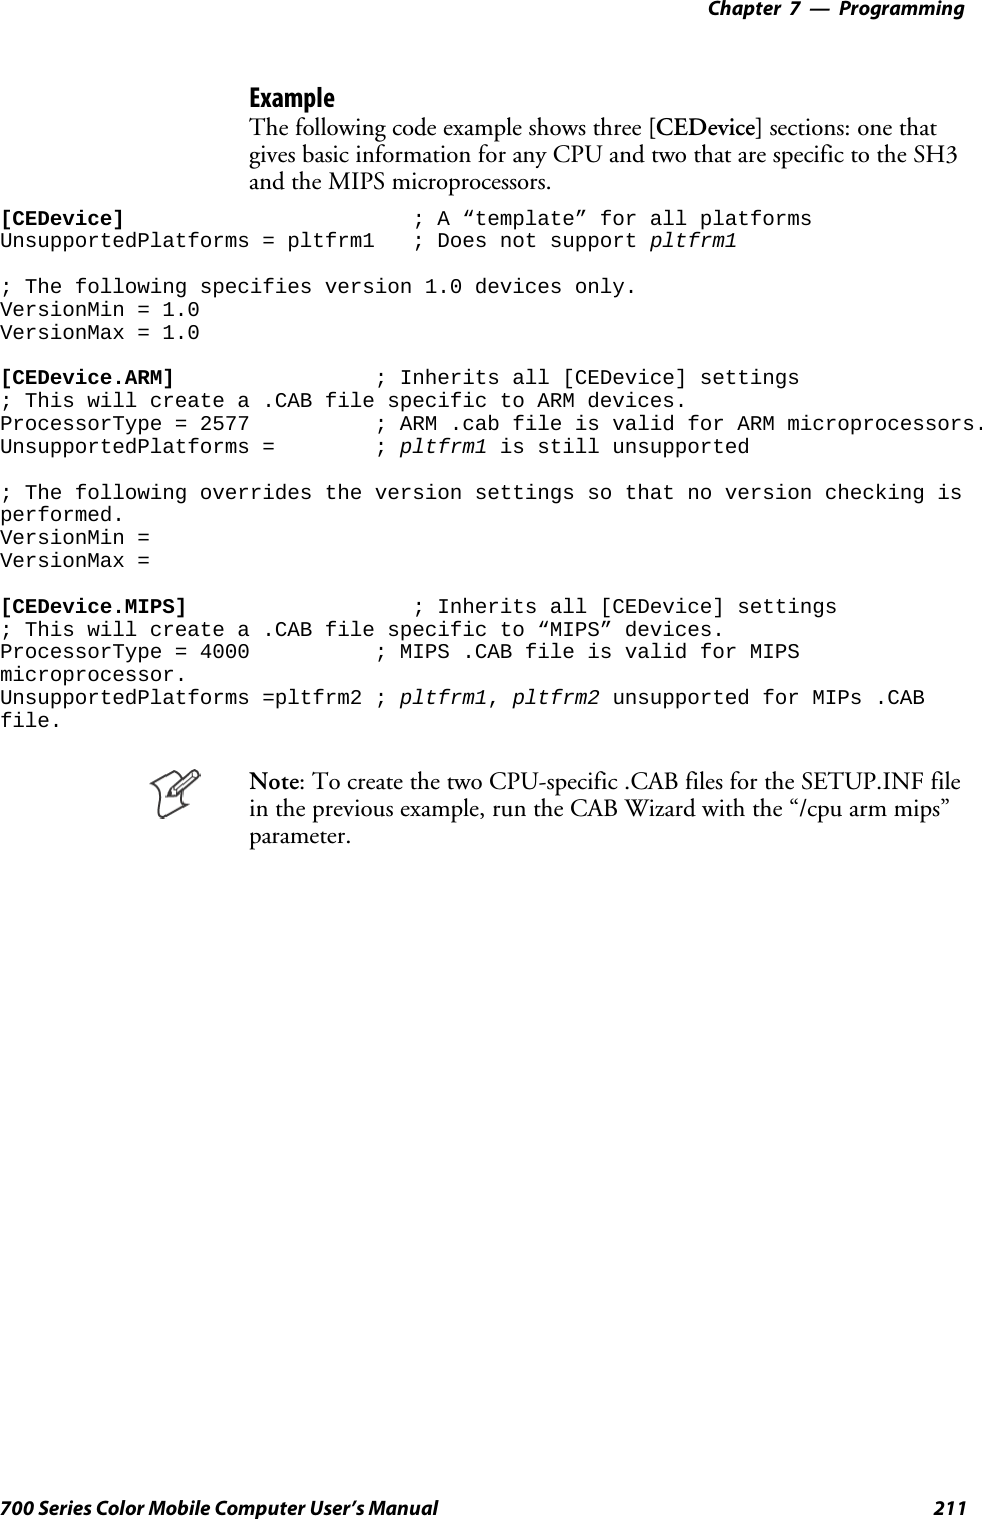 Programming—Chapter 7211700 Series Color Mobile Computer User’s ManualExampleThe following code example shows three [CEDevice] sections: one thatgives basic information for any CPU and two that are specific to the SH3and the MIPS microprocessors.[CEDevice] ; A “template” for all platformsUnsupportedPlatforms = pltfrm1 ; Does not support pltfrm1; The following specifies version 1.0 devices only.VersionMin = 1.0VersionMax = 1.0[CEDevice.ARM] ; Inherits all [CEDevice] settings; This will create a .CAB file specific to ARM devices.ProcessorType = 2577 ; ARM .cab file is valid for ARM microprocessors.UnsupportedPlatforms = ; pltfrm1 is still unsupported; The following overrides the version settings so that no version checking isperformed.VersionMin =VersionMax =[CEDevice.MIPS] ; Inherits all [CEDevice] settings; This will create a .CAB file specific to “MIPS” devices.ProcessorType = 4000 ; MIPS .CAB file is valid for MIPSmicroprocessor.UnsupportedPlatforms =pltfrm2 ; pltfrm1,pltfrm2 unsupported for MIPs .CABfile.Note: To create the two CPU-specific .CAB files for the SETUP.INF filein the previous example, run the CAB Wizard with the “/cpu arm mips”parameter.